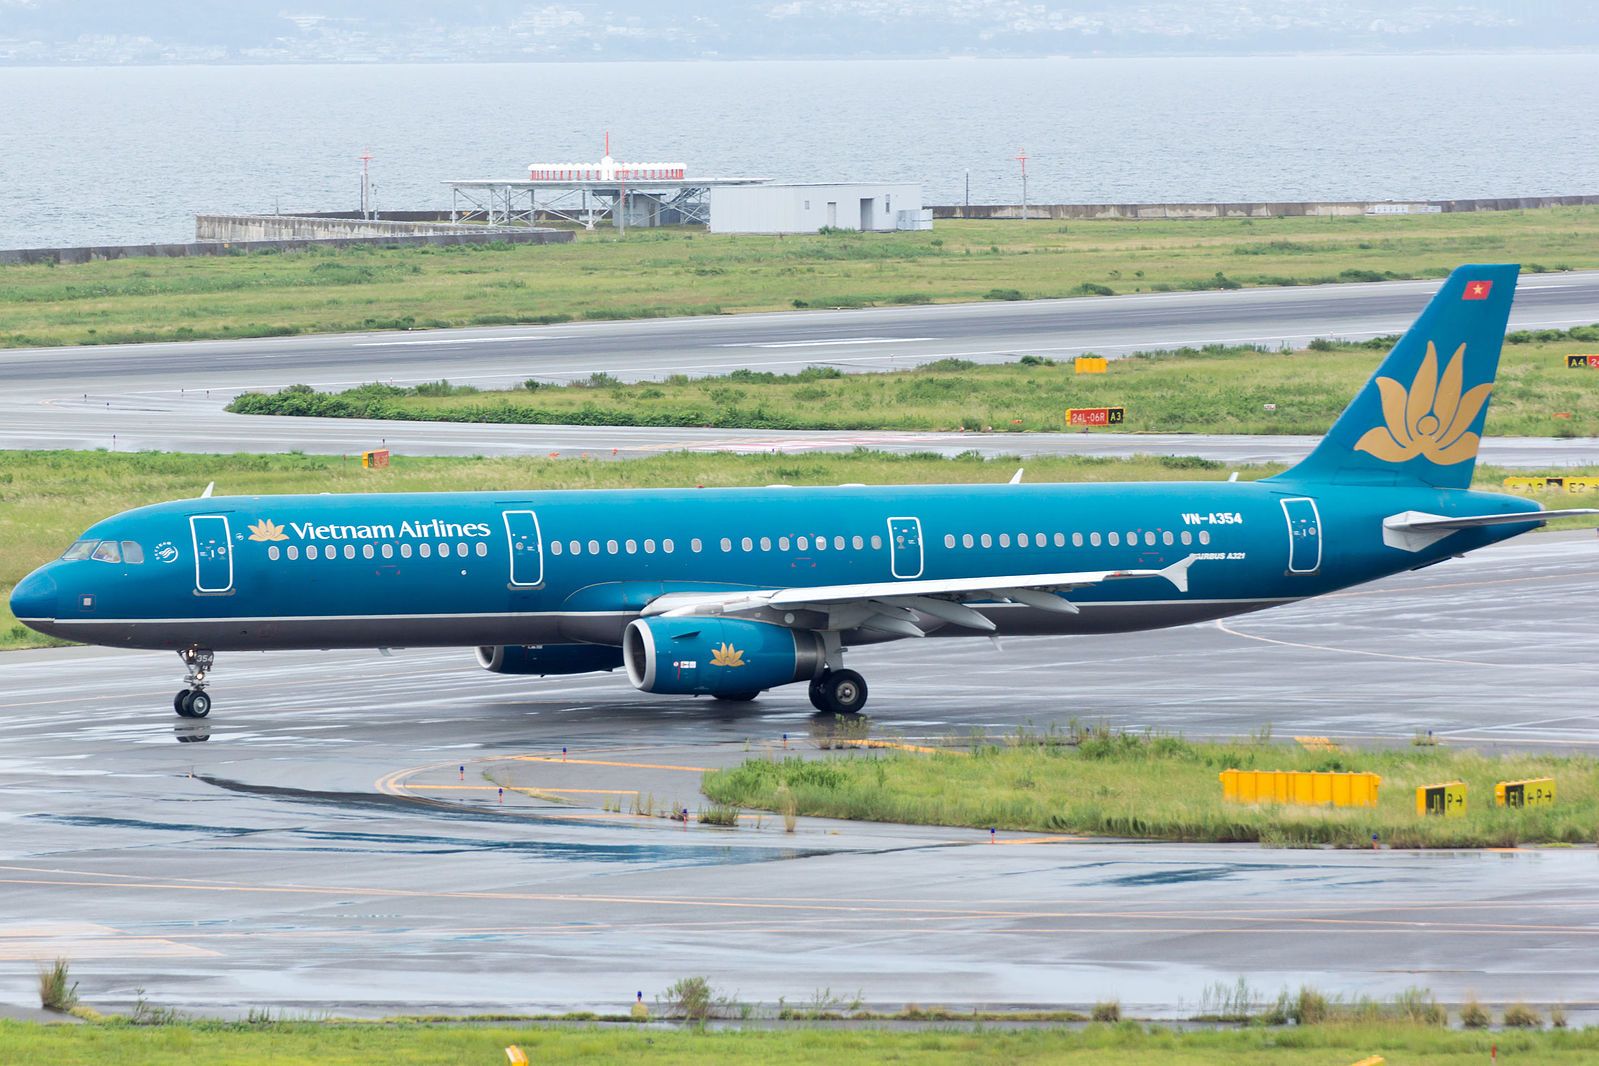 Vietnam Airlines A321-200 on taxiway at airport